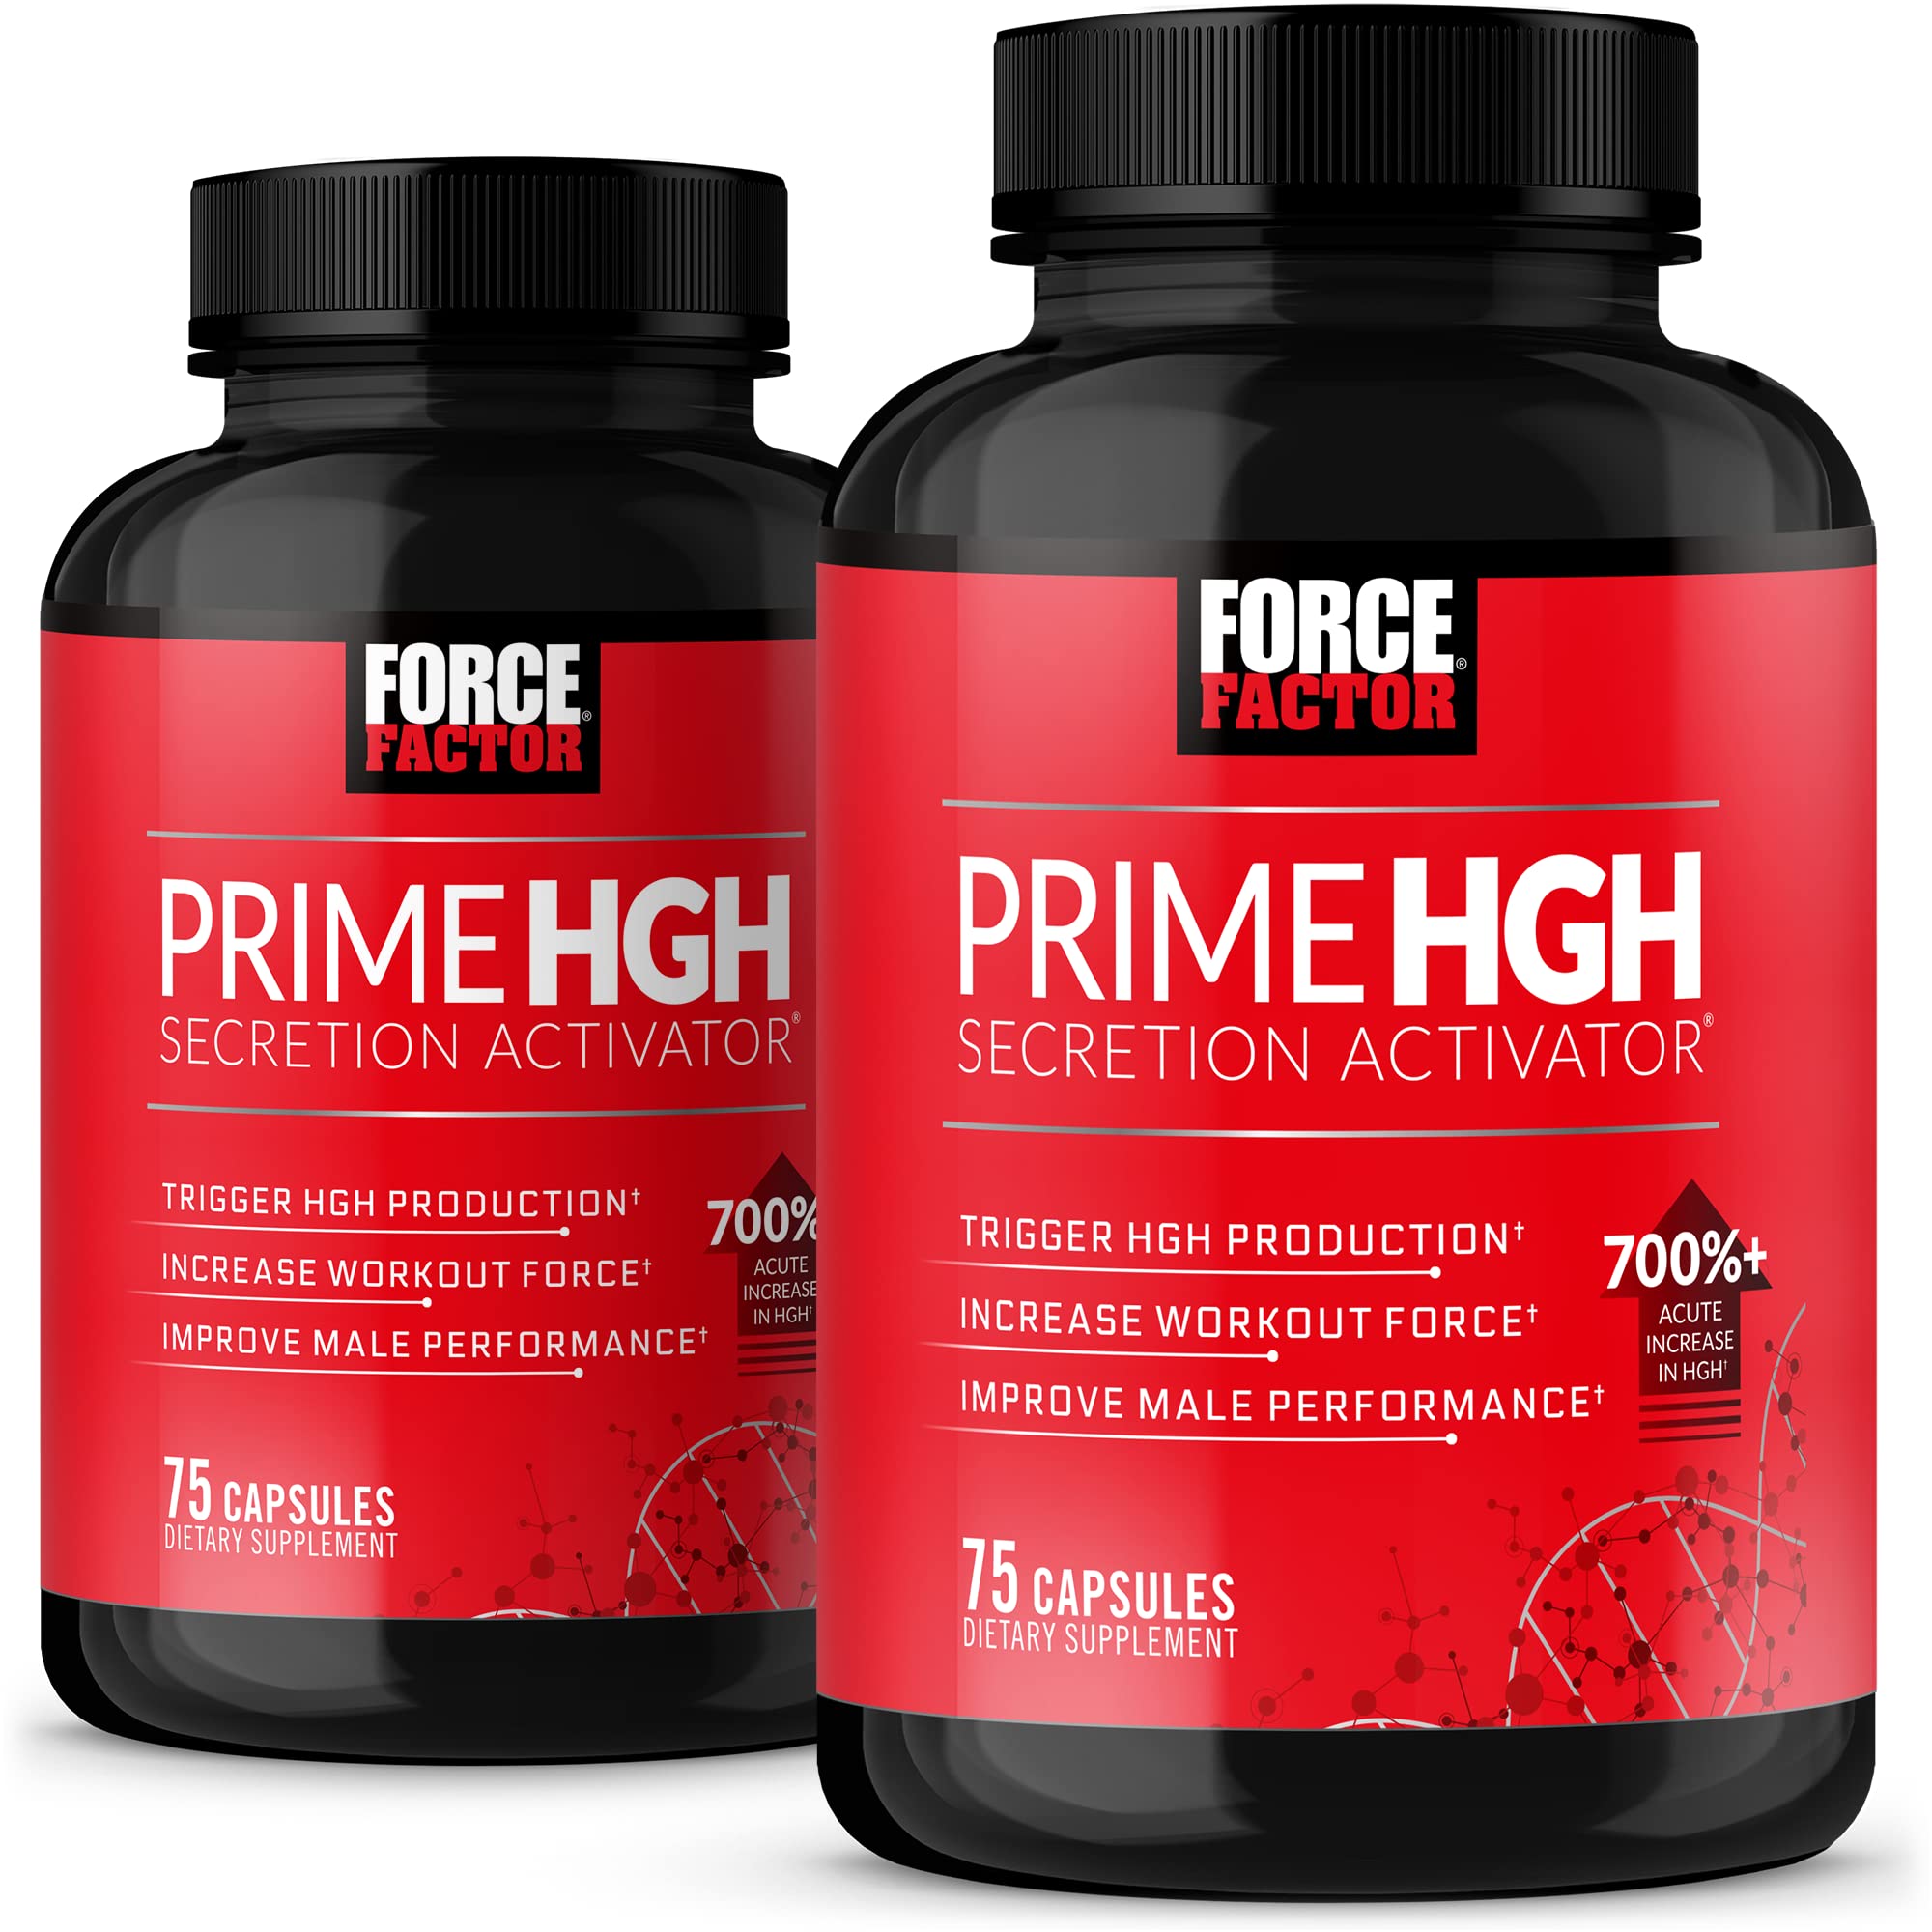 Force Factor Prime HGH Secretion Activator, 2-Pack, HGH Supplement for Men with AlphaSize to Help Trigger HGH Production, Increase Workout Force, & Improve Performance, 150 Capsules